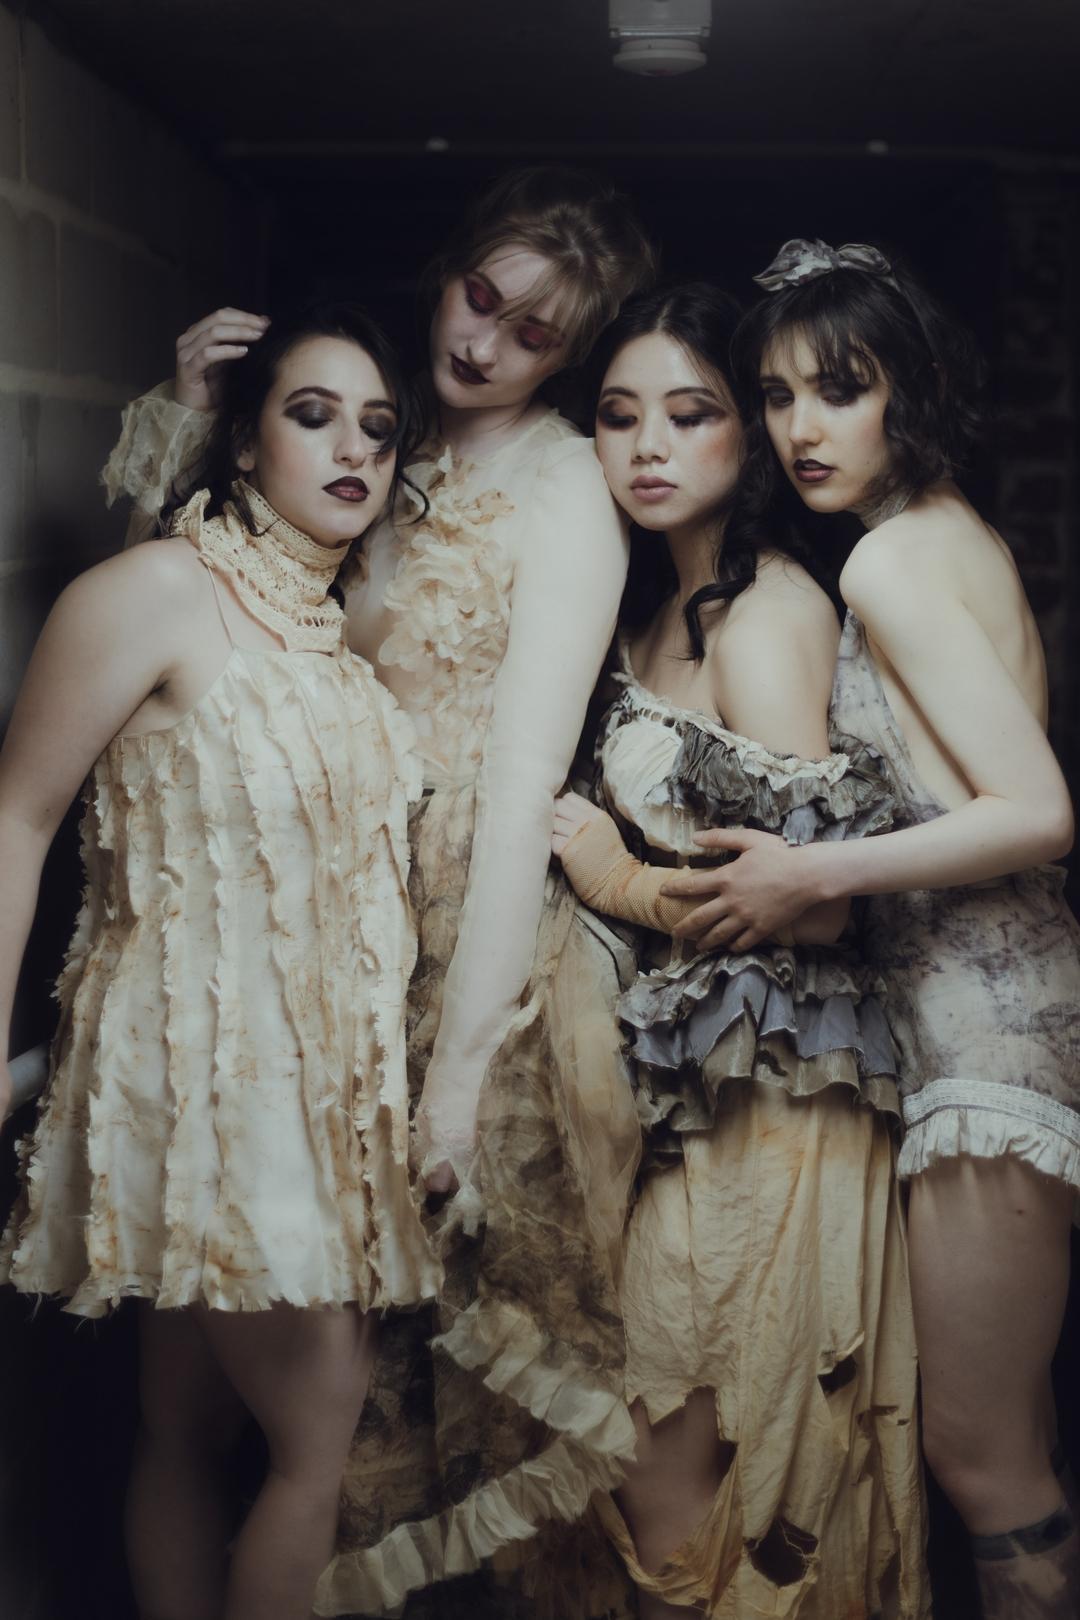 Four women in vintage attire pose intimately, their ruffled dresses in muted earth tones complementing the subdued lighting.